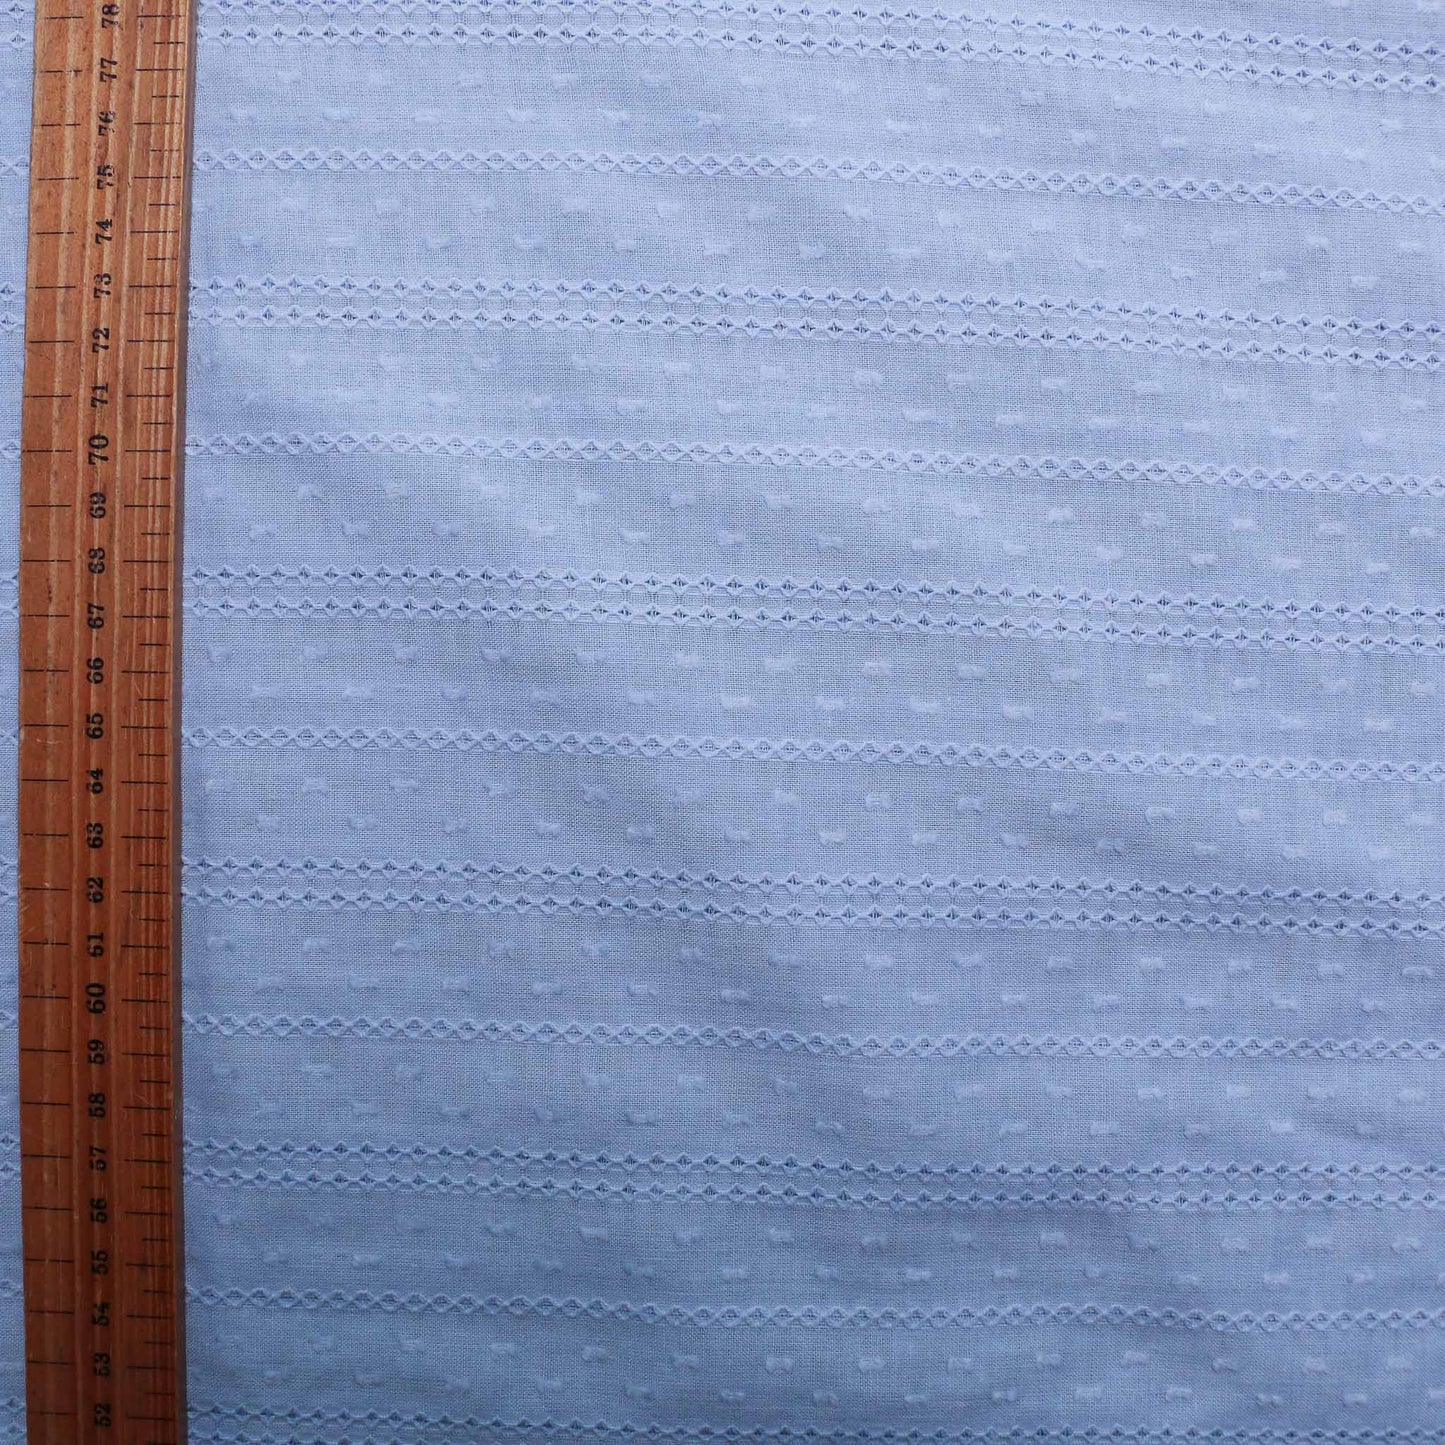 cotton lawn broad anglaise dressmaking fabric in pale blue